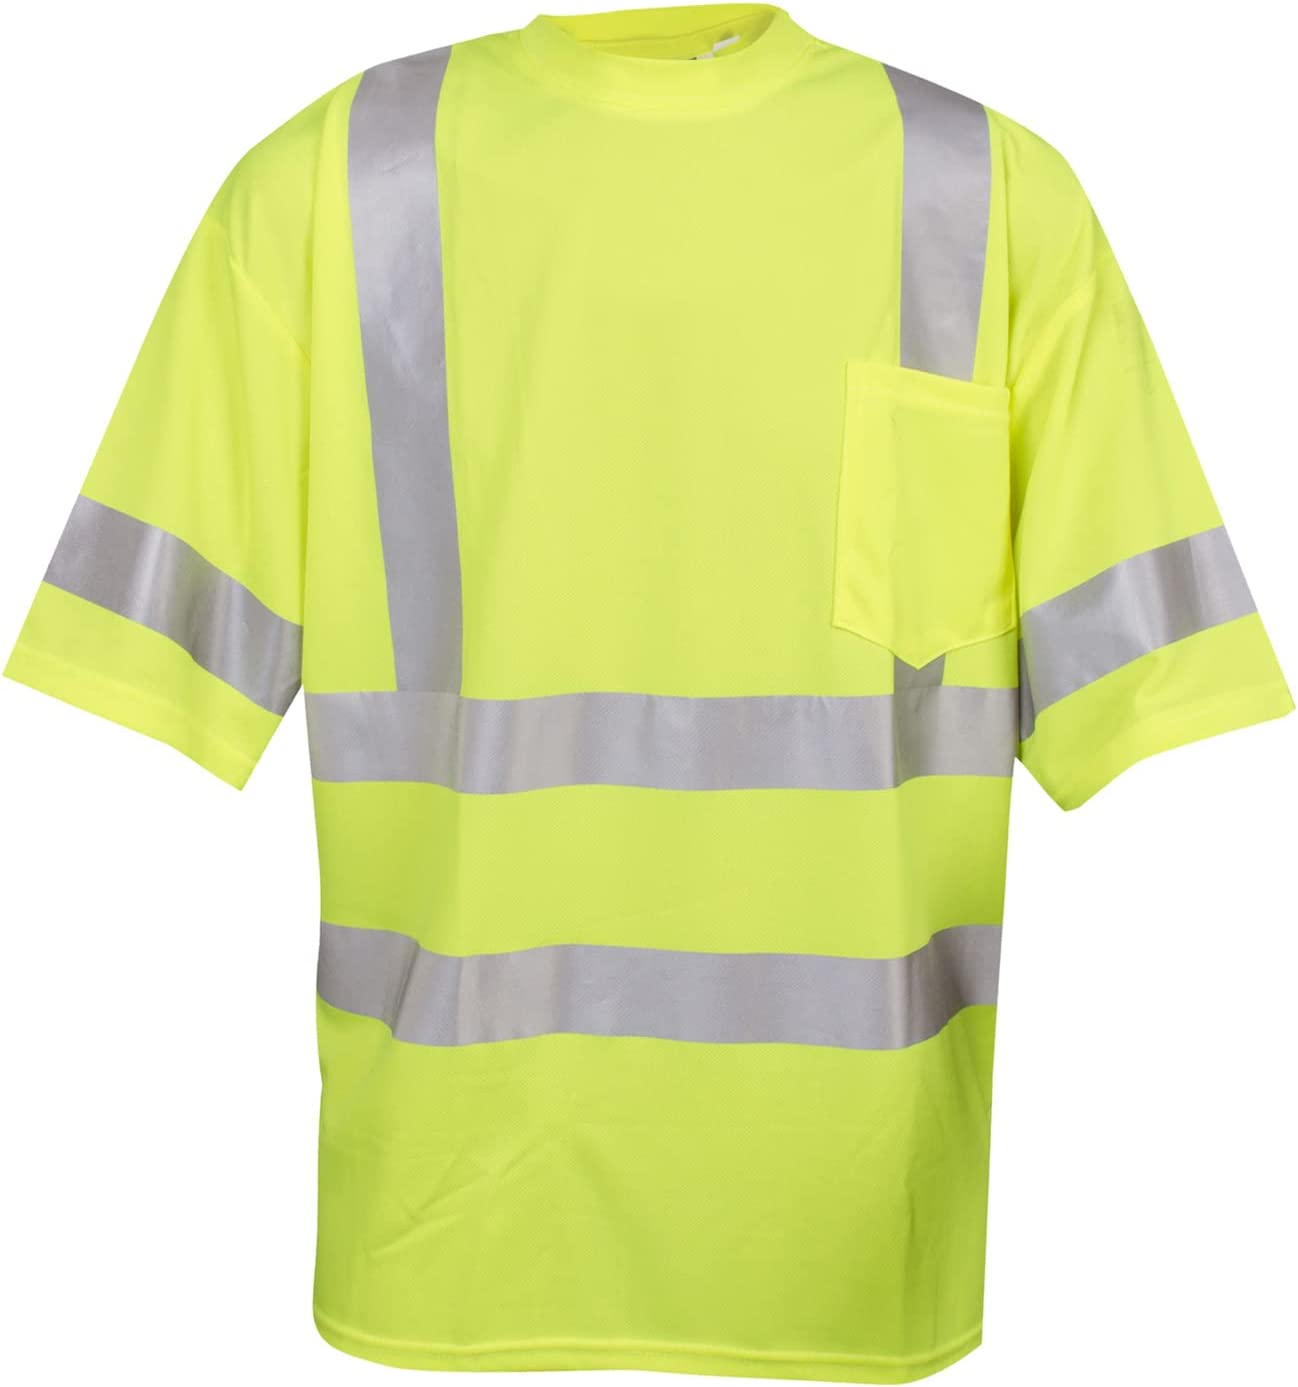 Moisture-Wicking Reflective T-Shirt, High-Visiblity, Type R, Class 3